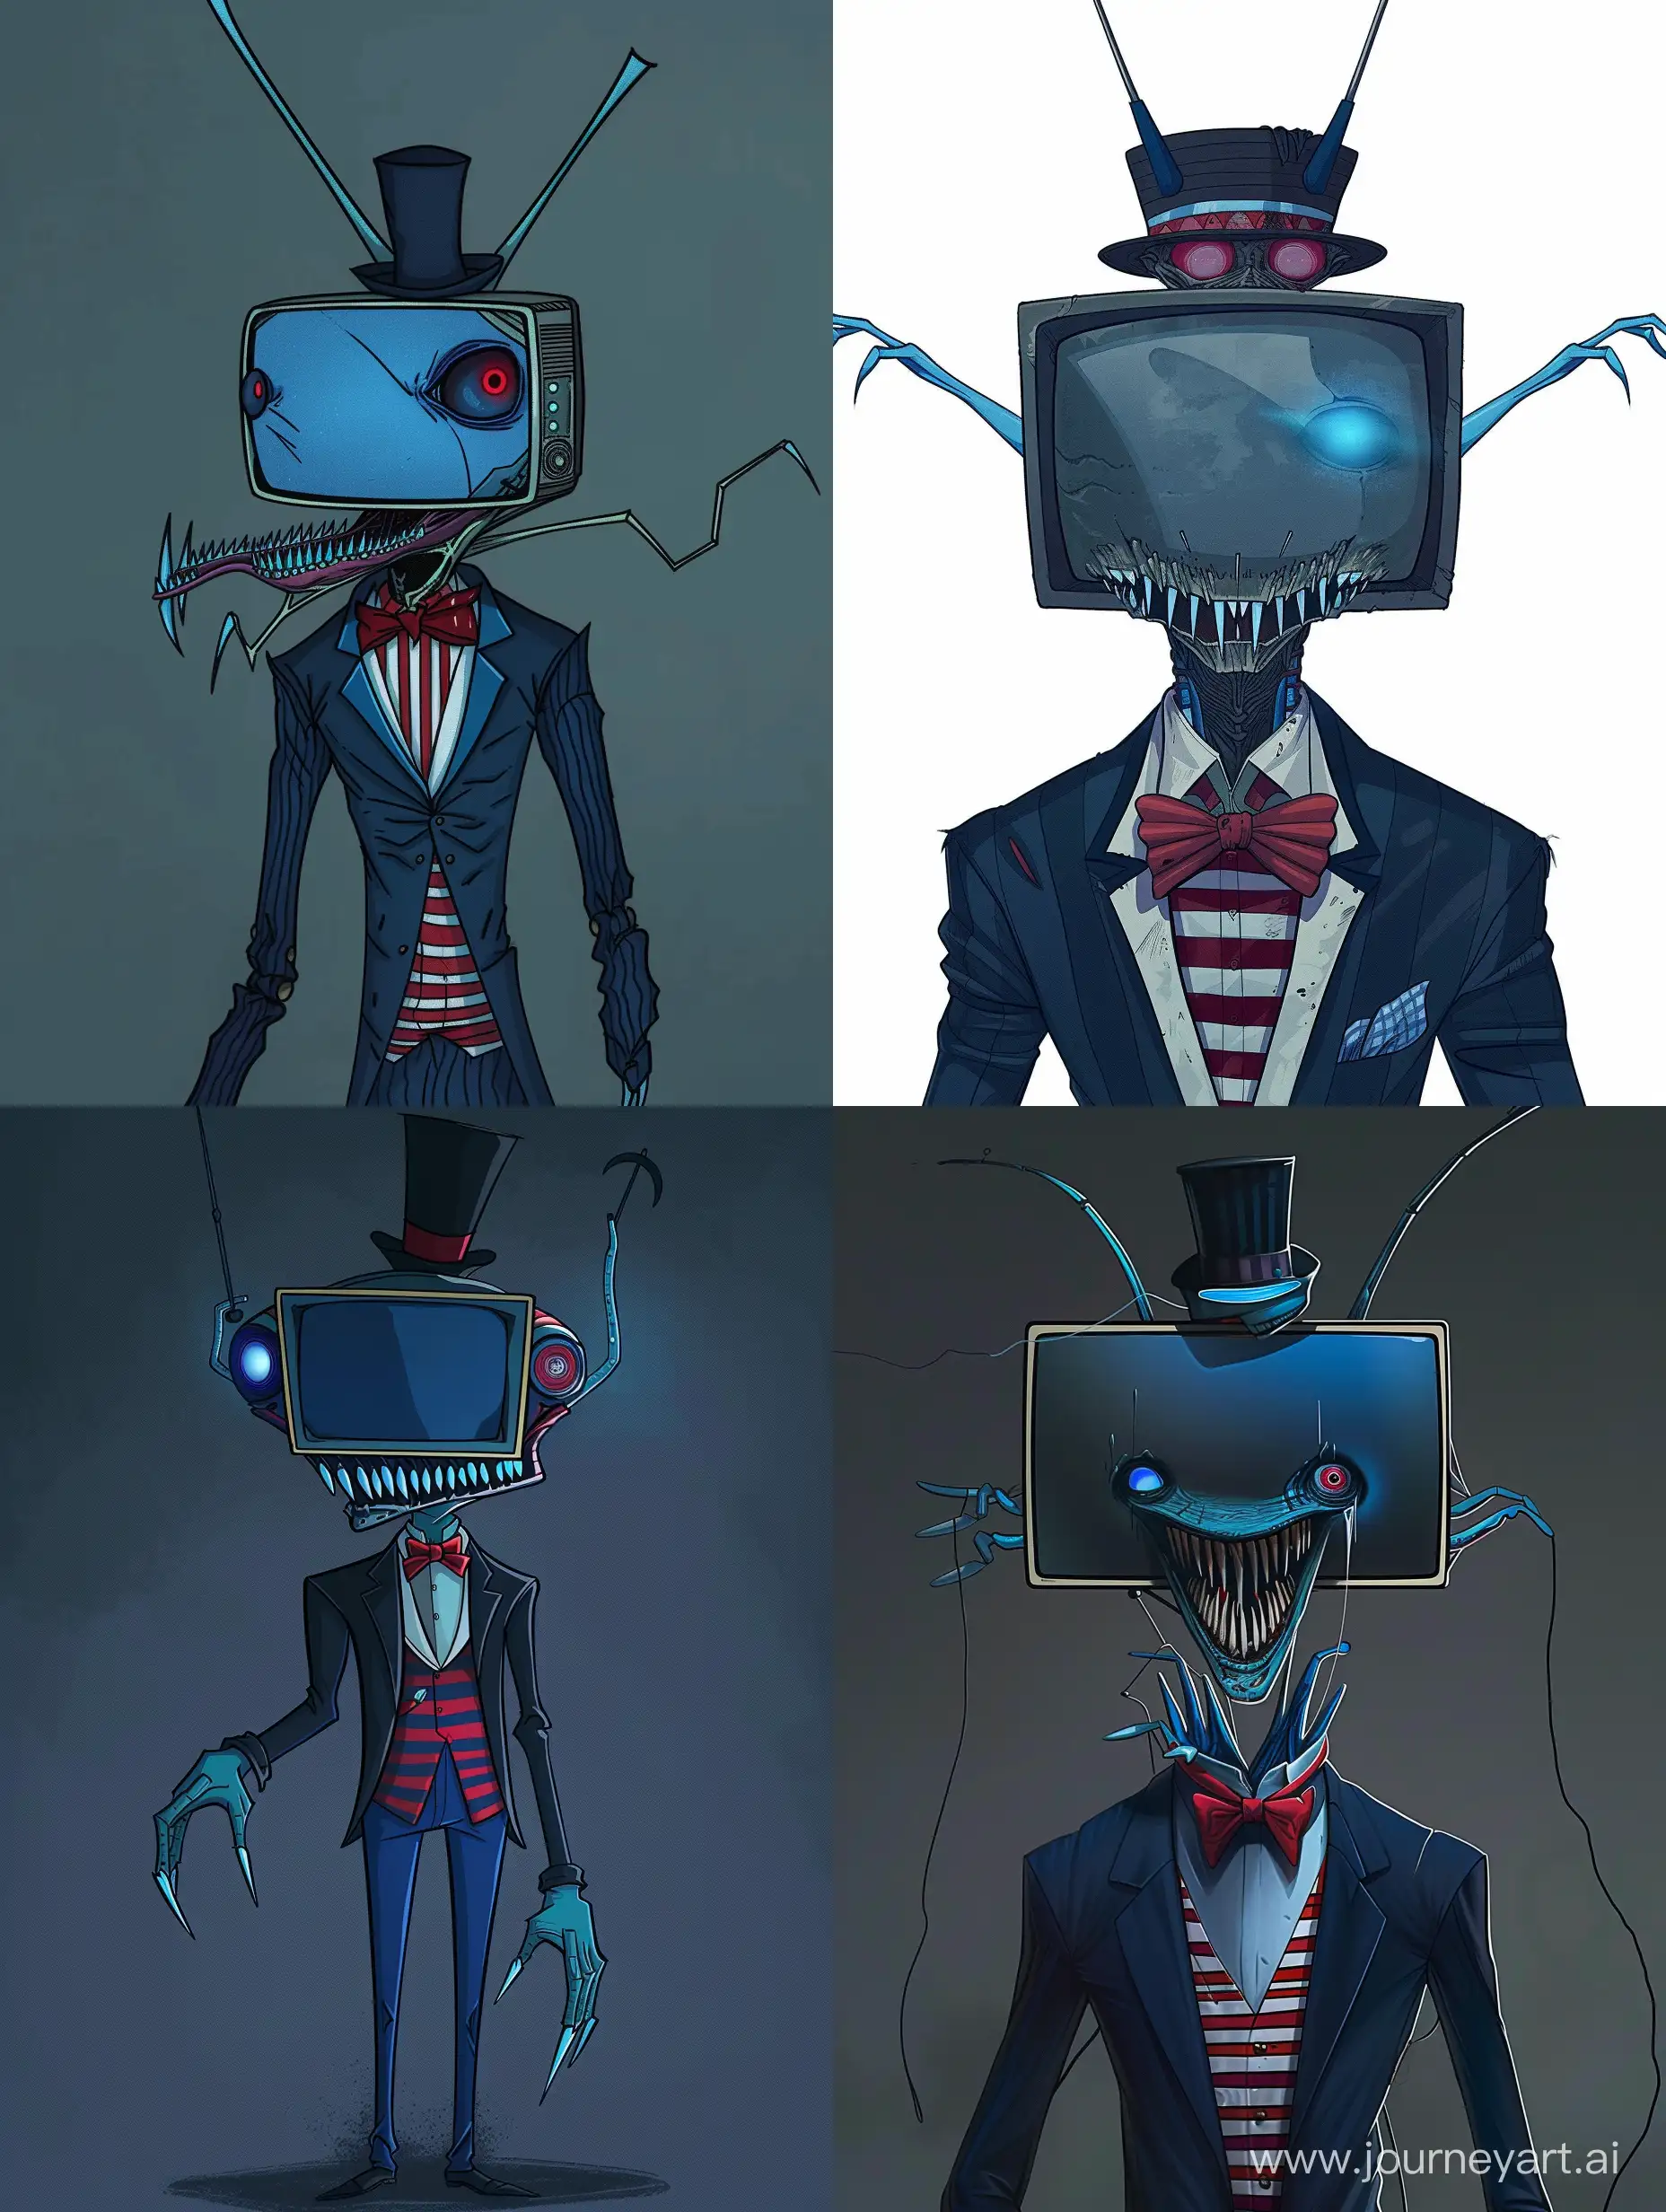 a thin and tall man with a flat-screen TV instead of a head. He has a blue mouth with sharp light blue large teeth. The eyes are red, with blue pupils. The right eye has a black outline, while the left eye has a blue outline. There are 2 antennas sticking out of the head. The skin is dark gray except for the light blue tips of the fingers. He wears a dark blue tuxedo with white stripes, a striped red and black shirt, a red bow tie and a black top hat. He wears a blue T-shirt under his jacket.
